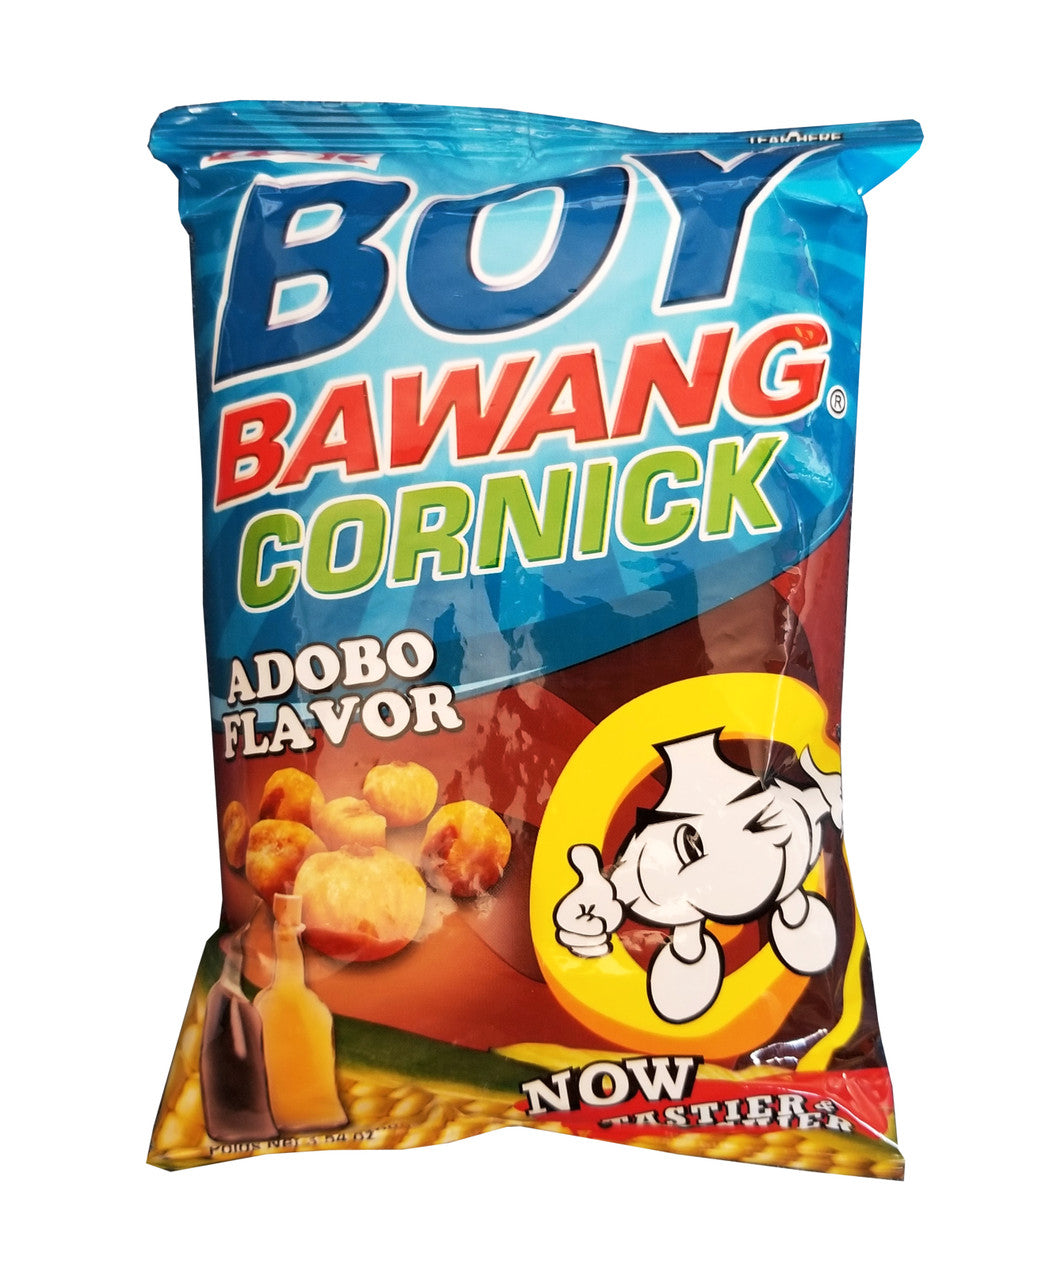 Boy Bawang Cornick Adobo Flavored Fried Corn, 100g/3.5 oz. Bag {Imported from Canada}